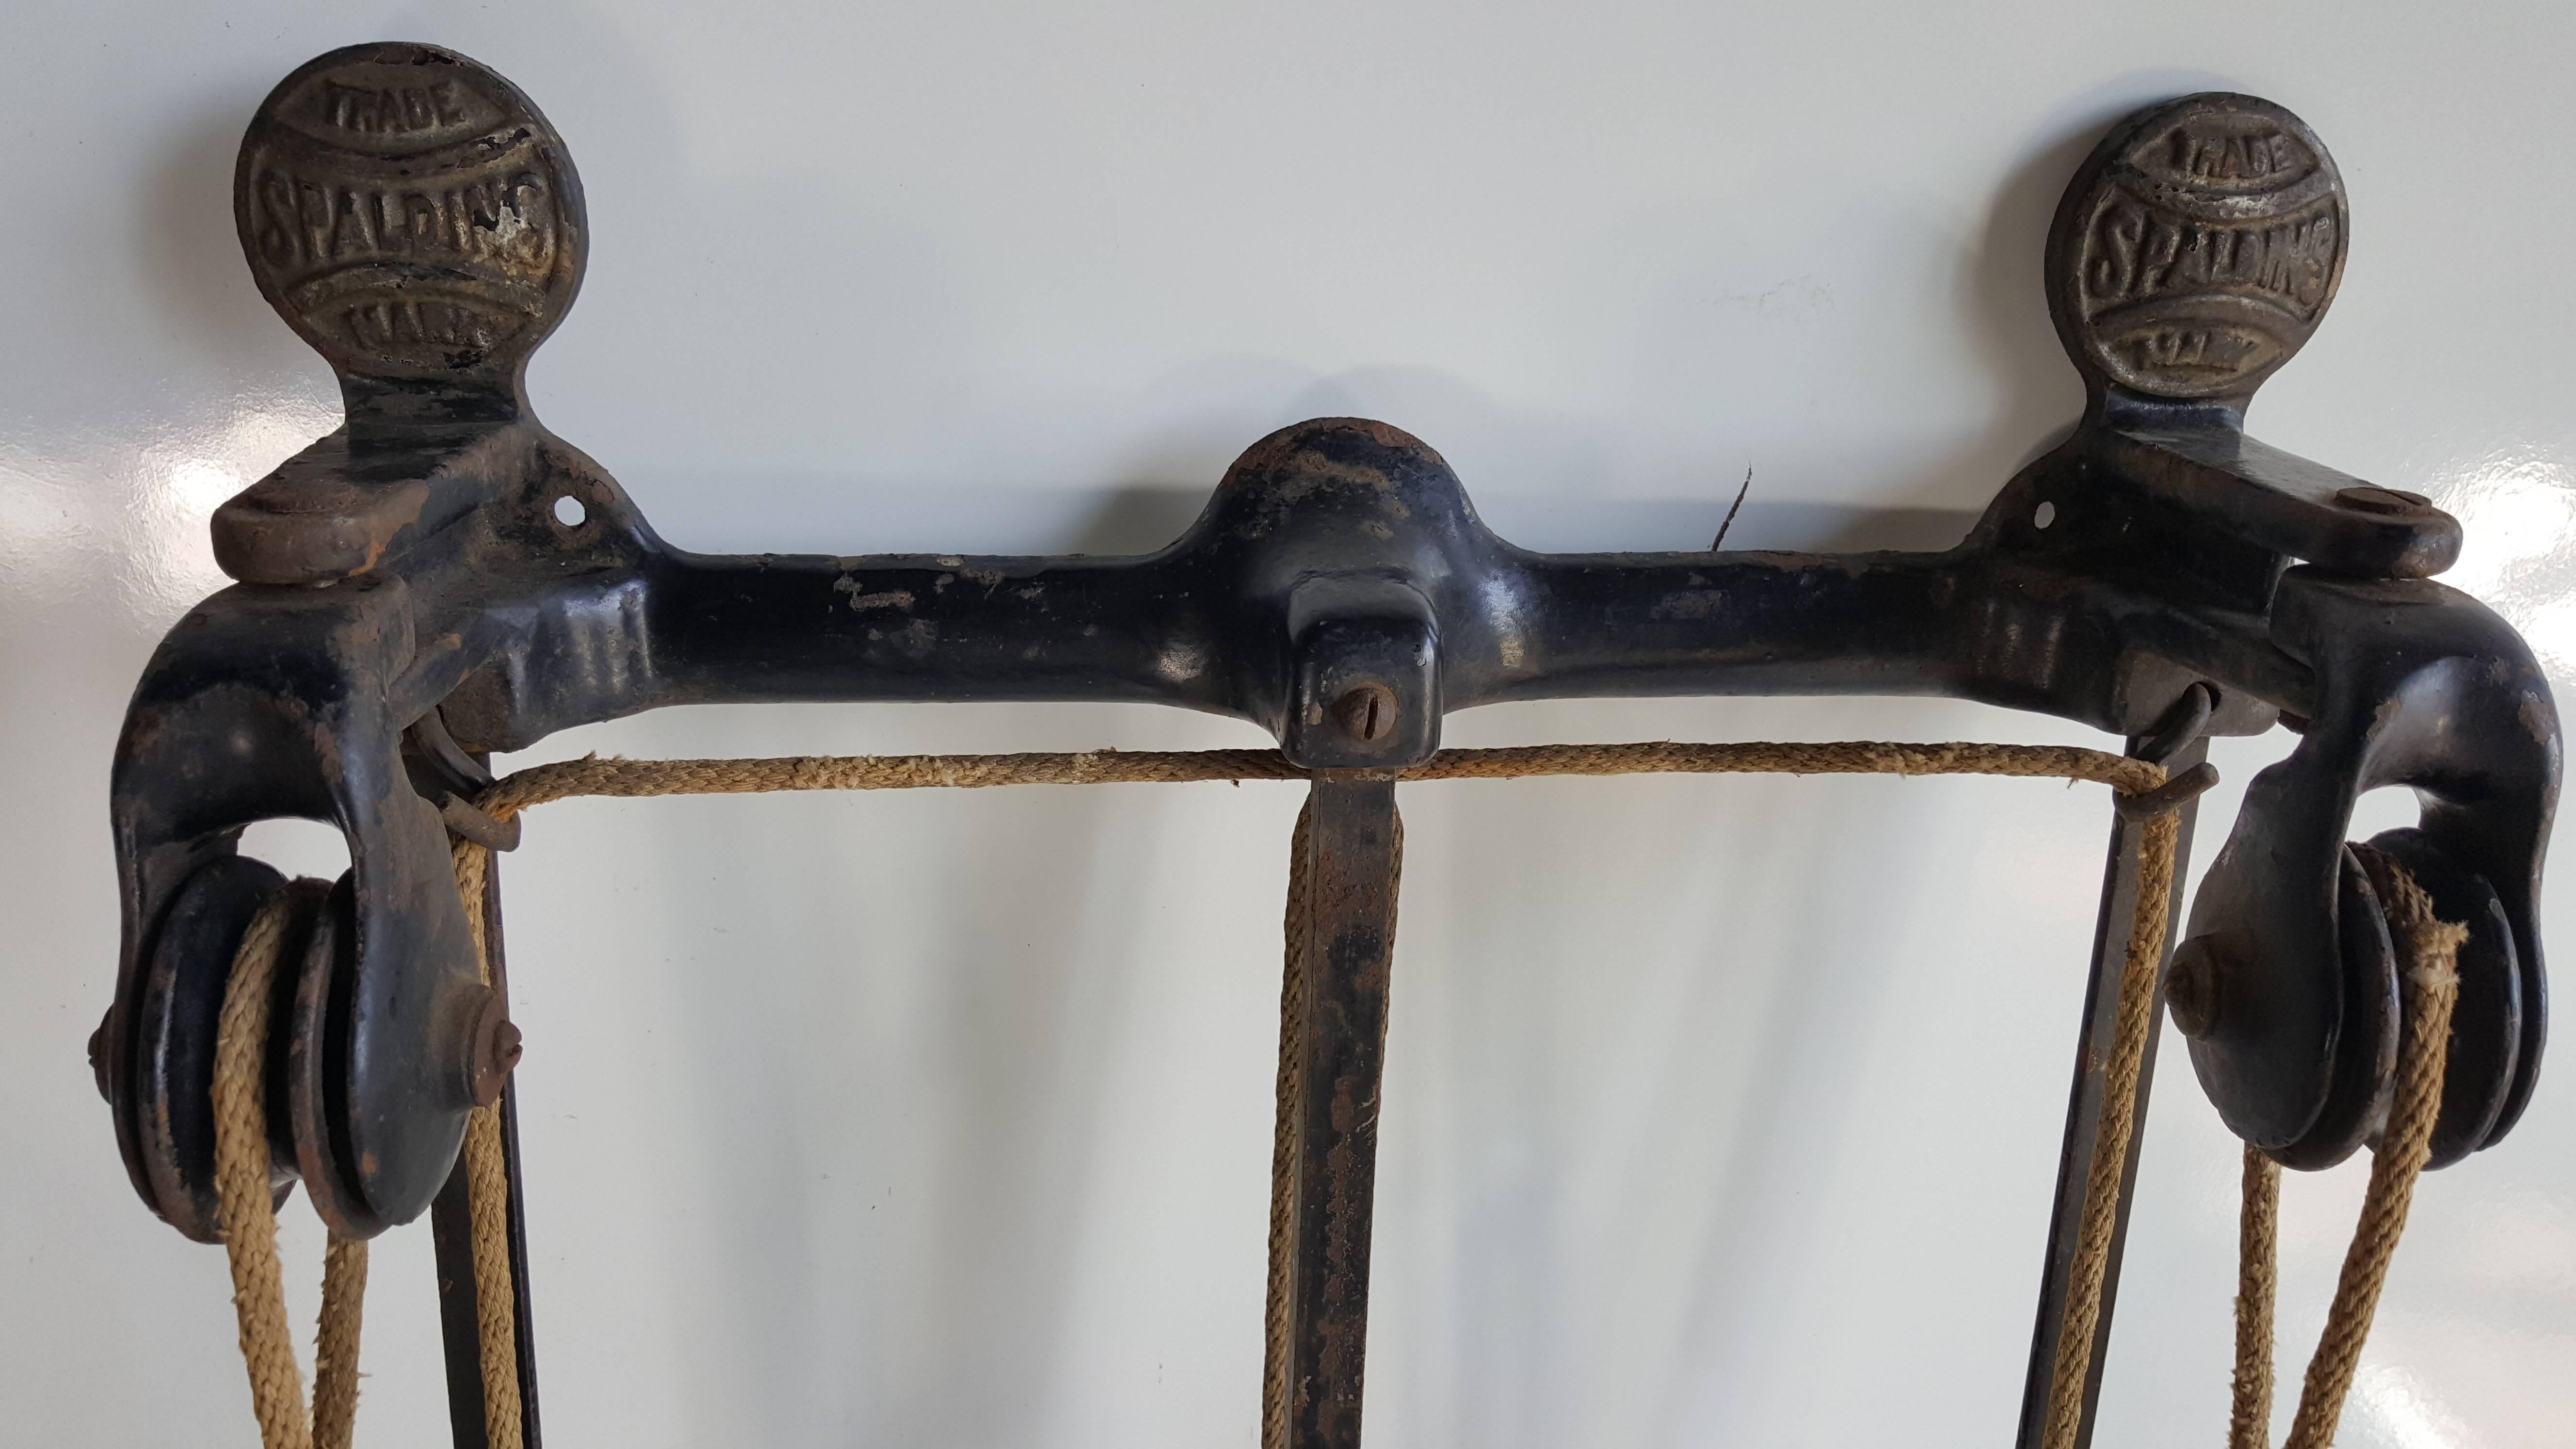 Cast Turn of the Century Spualding Exercise Weight Training Machine, circa 1896